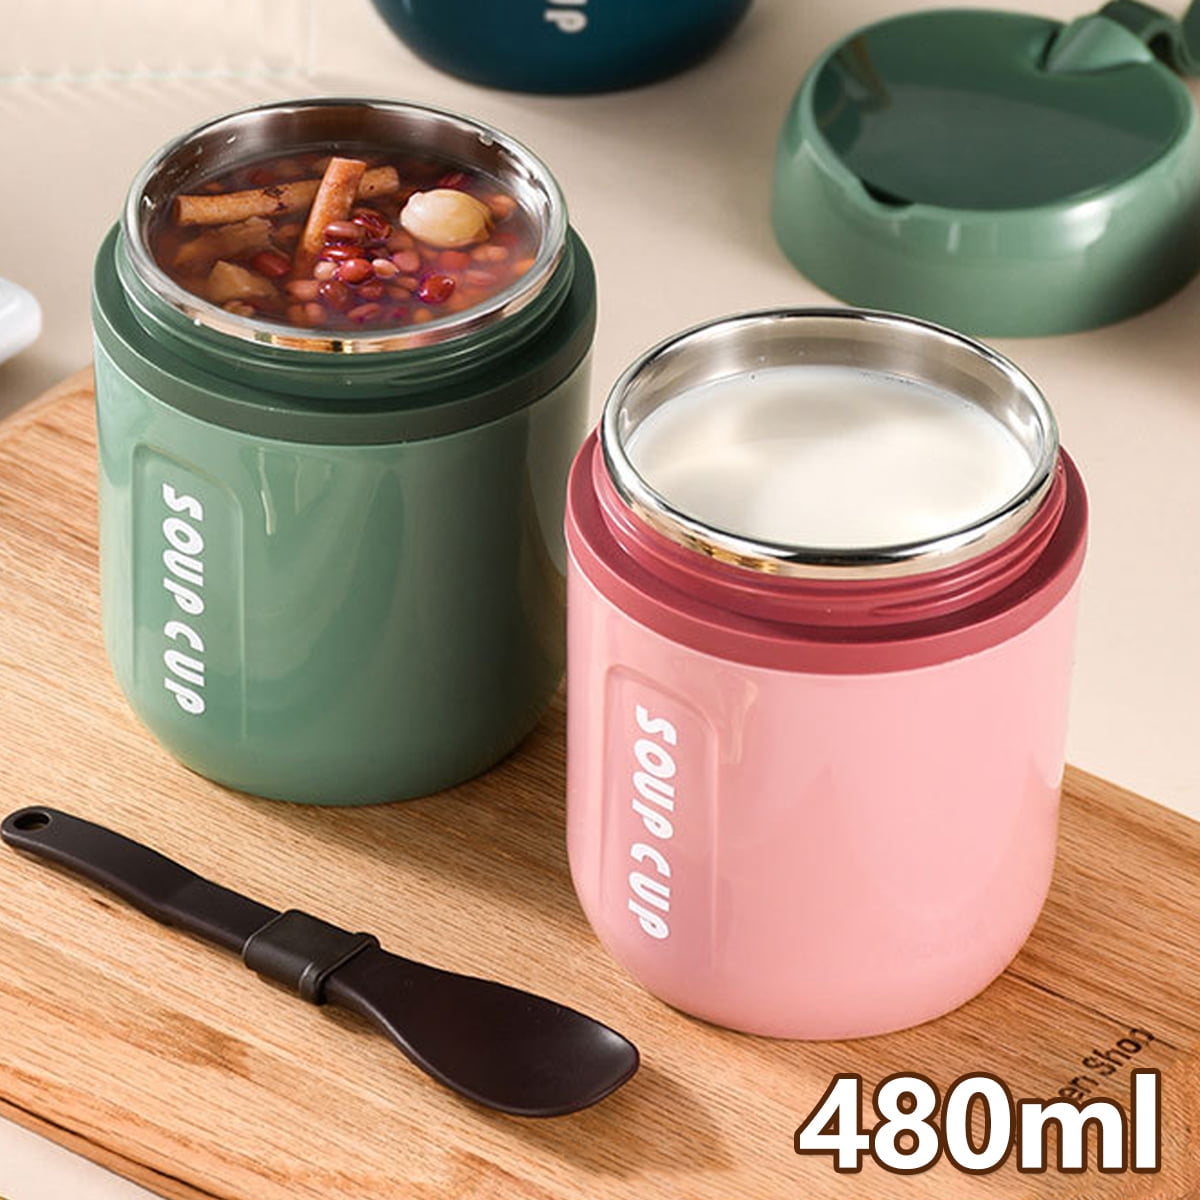 Insulated Food Jar, Thermal For Hot Food, Leak Proof Wide Mouth Soup  Containers For Hot & Cold Food With Spoon, Breakfast, Travel, Gym, Office,  Crunch Cups For Cereal And Milk On The